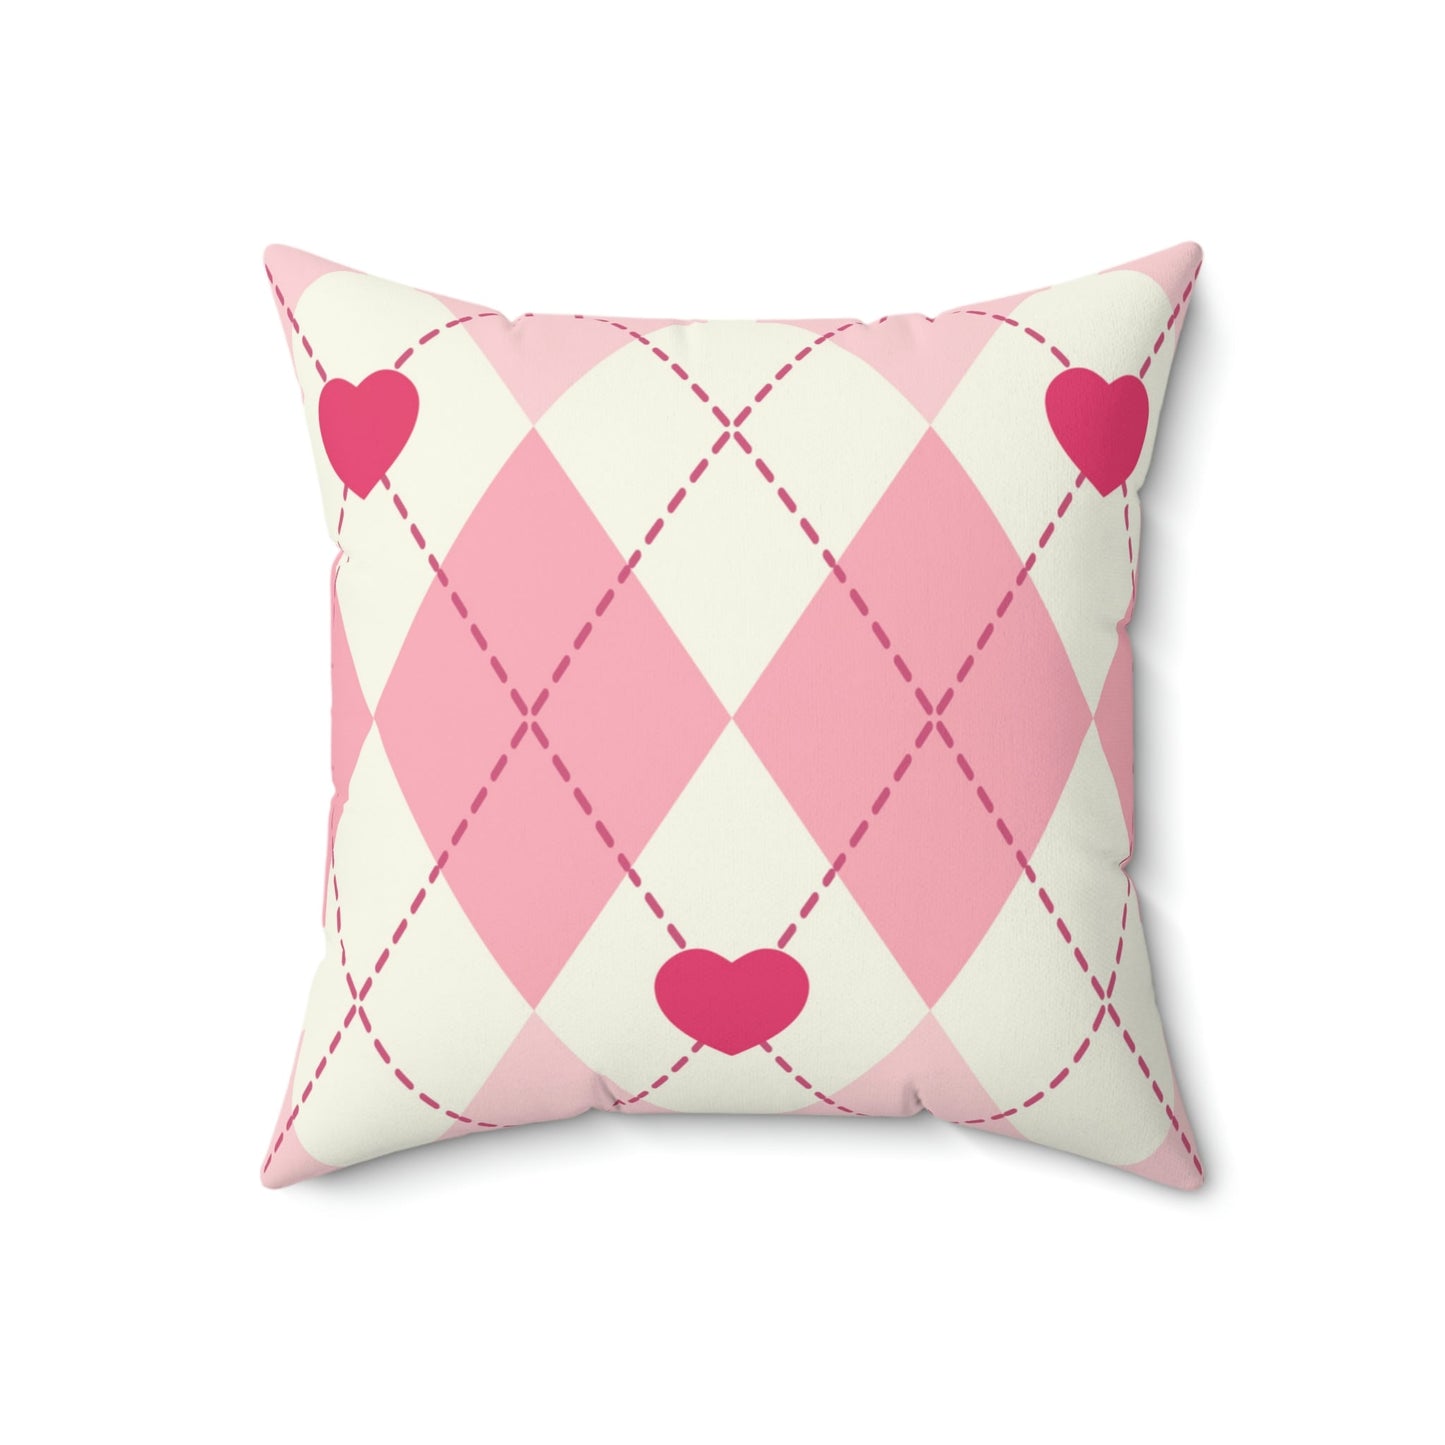 Argyle Hearts Square Pillow Home Decor Pink Sweetheart